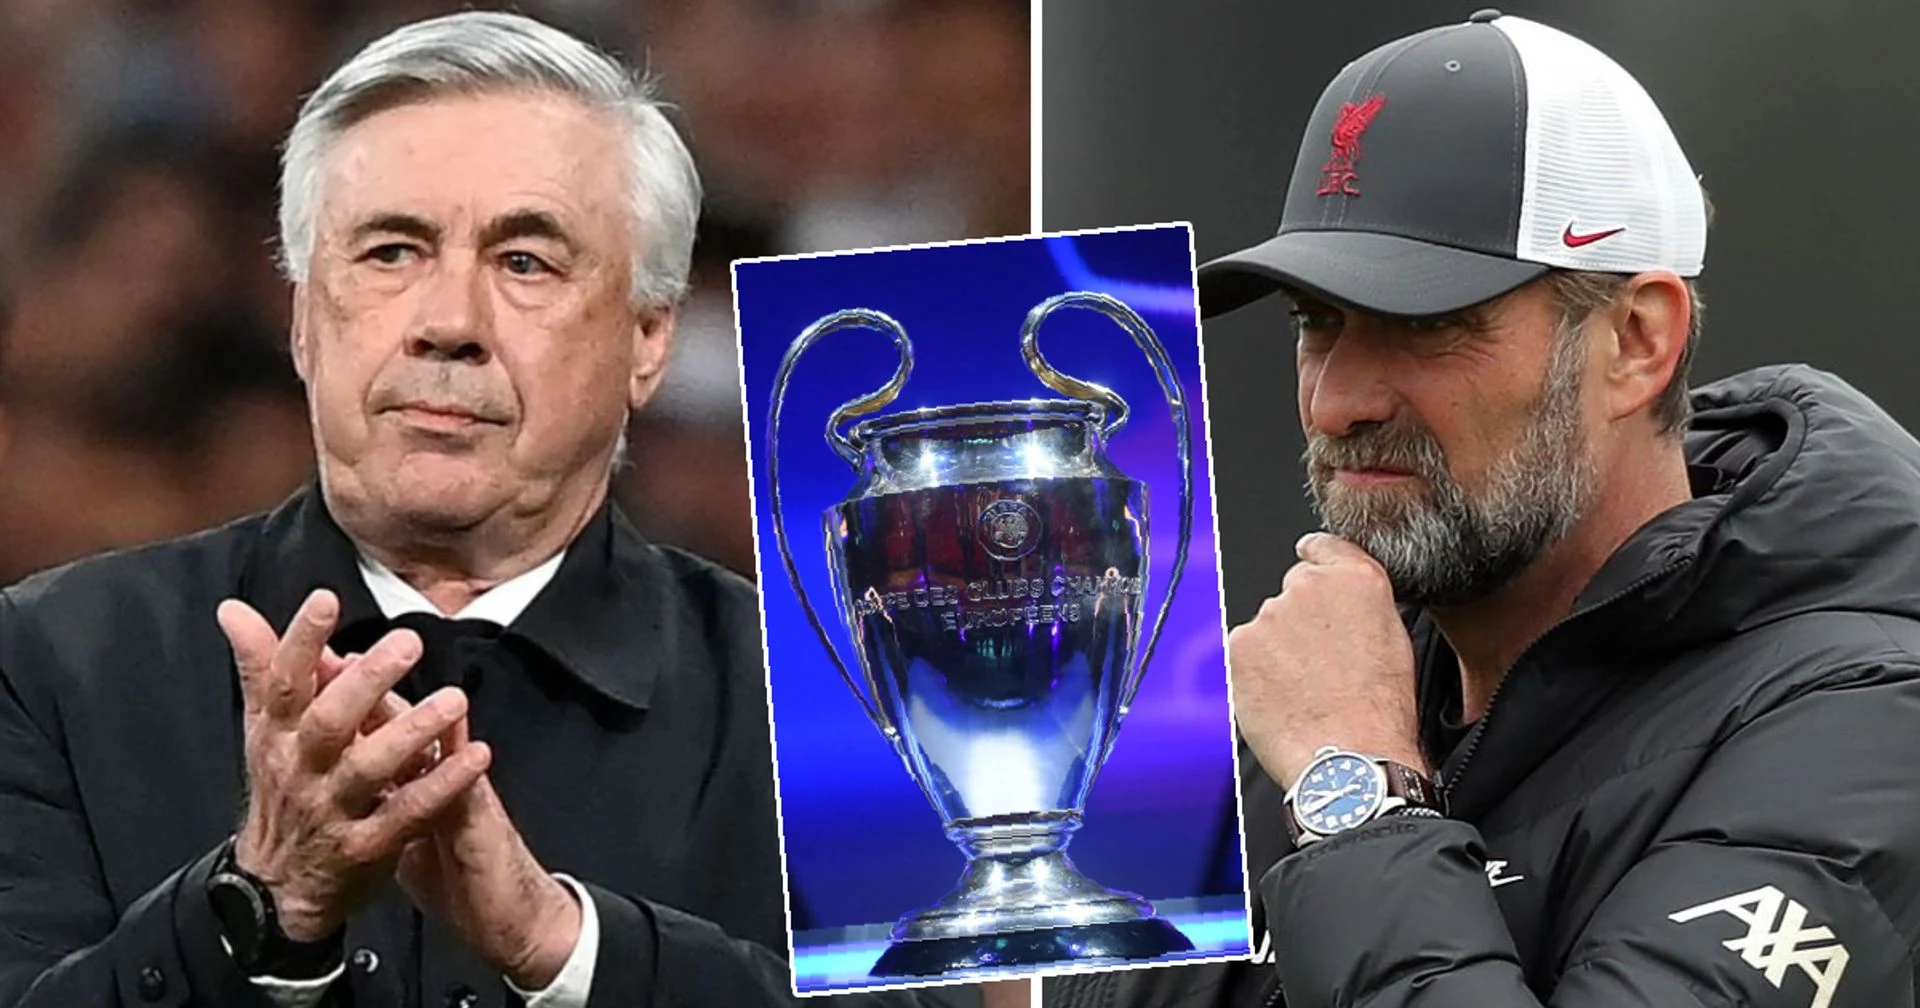 Champions League final: Date, venue, kick-off time and everything to know